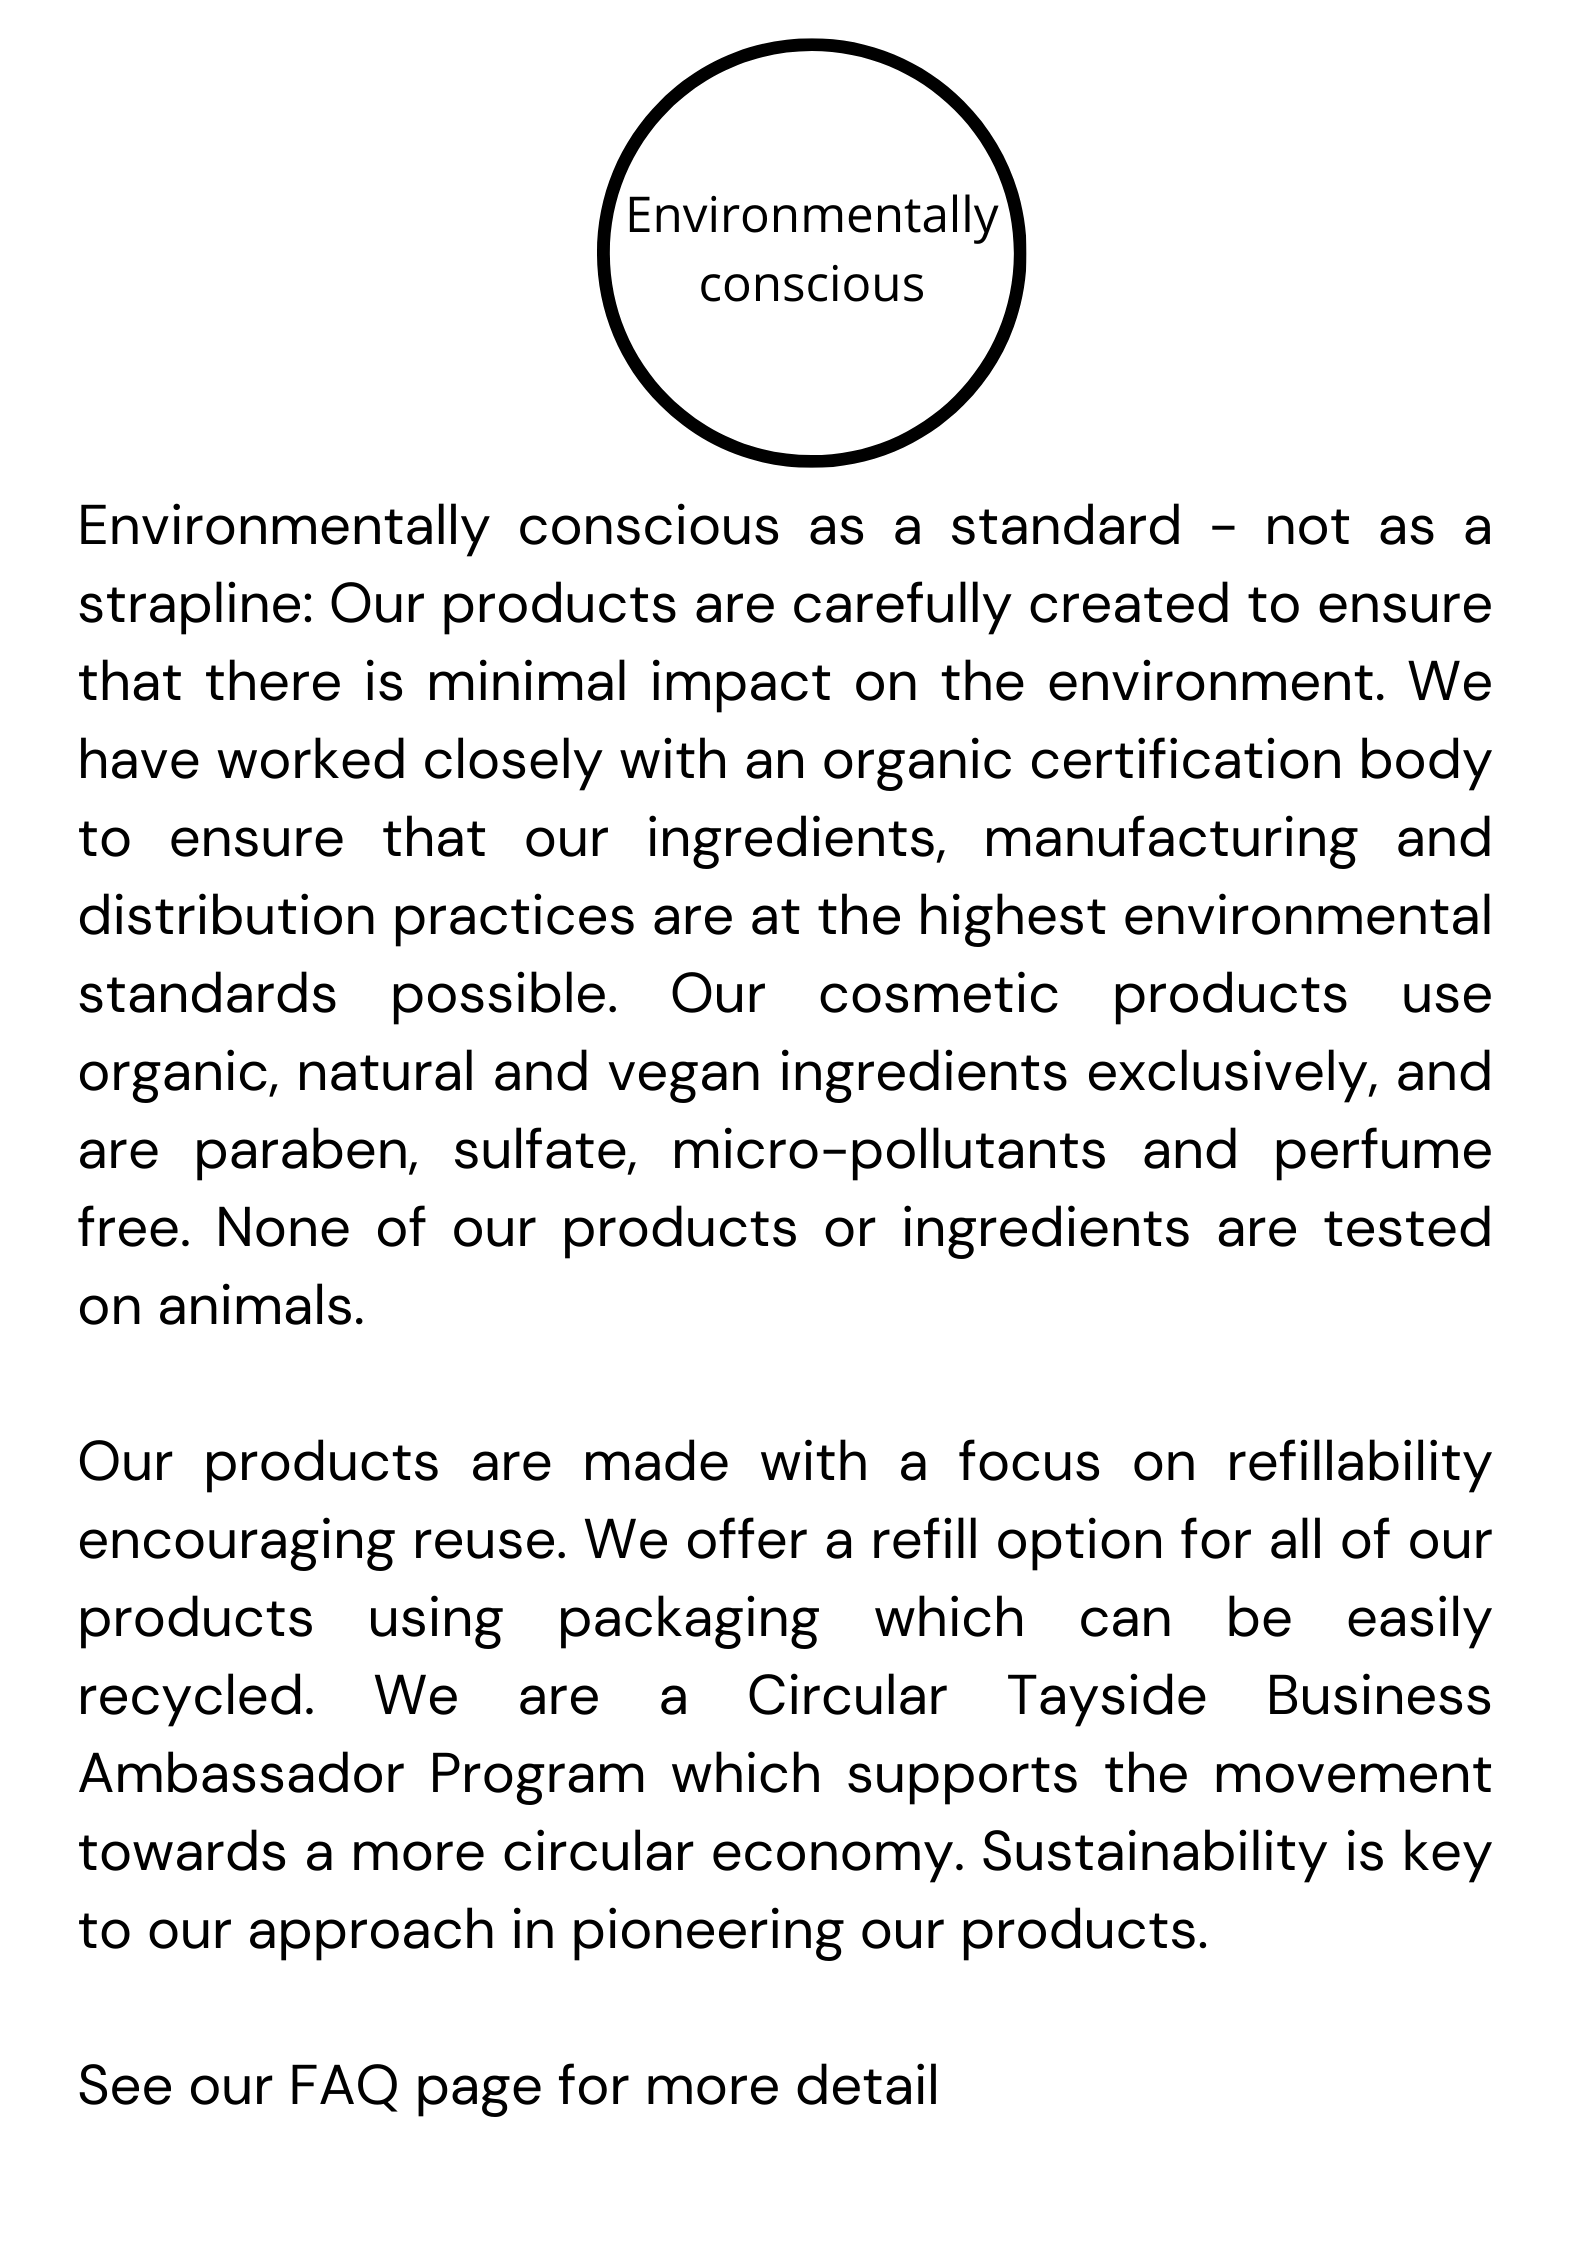 Environmentally conscious as a standard - not as a strapline: Our products are carefully created to ensure that there is minimal impact on the environment. We have worked closely with an organic certification body to ensure that our ingredients, manufacturing and distribution practices are at the highest environmental standards possible. Our cosmetic products use organic, natural and vegan ingredients exclusively, and are paraben, sulfate, micro-pollutants and perfume free. None of our products or ingredients are tested on animals.   Our products are made with a focus on refillability encouraging reuse. We offer a refill option for all of our products using packaging which can be easily recycled. We are a Circular Tayside Business Ambassador Program which supports the movement towards a more circular economy. Sustainability is key to our approach in pioneering our products.  See our FAQ page for more detail 